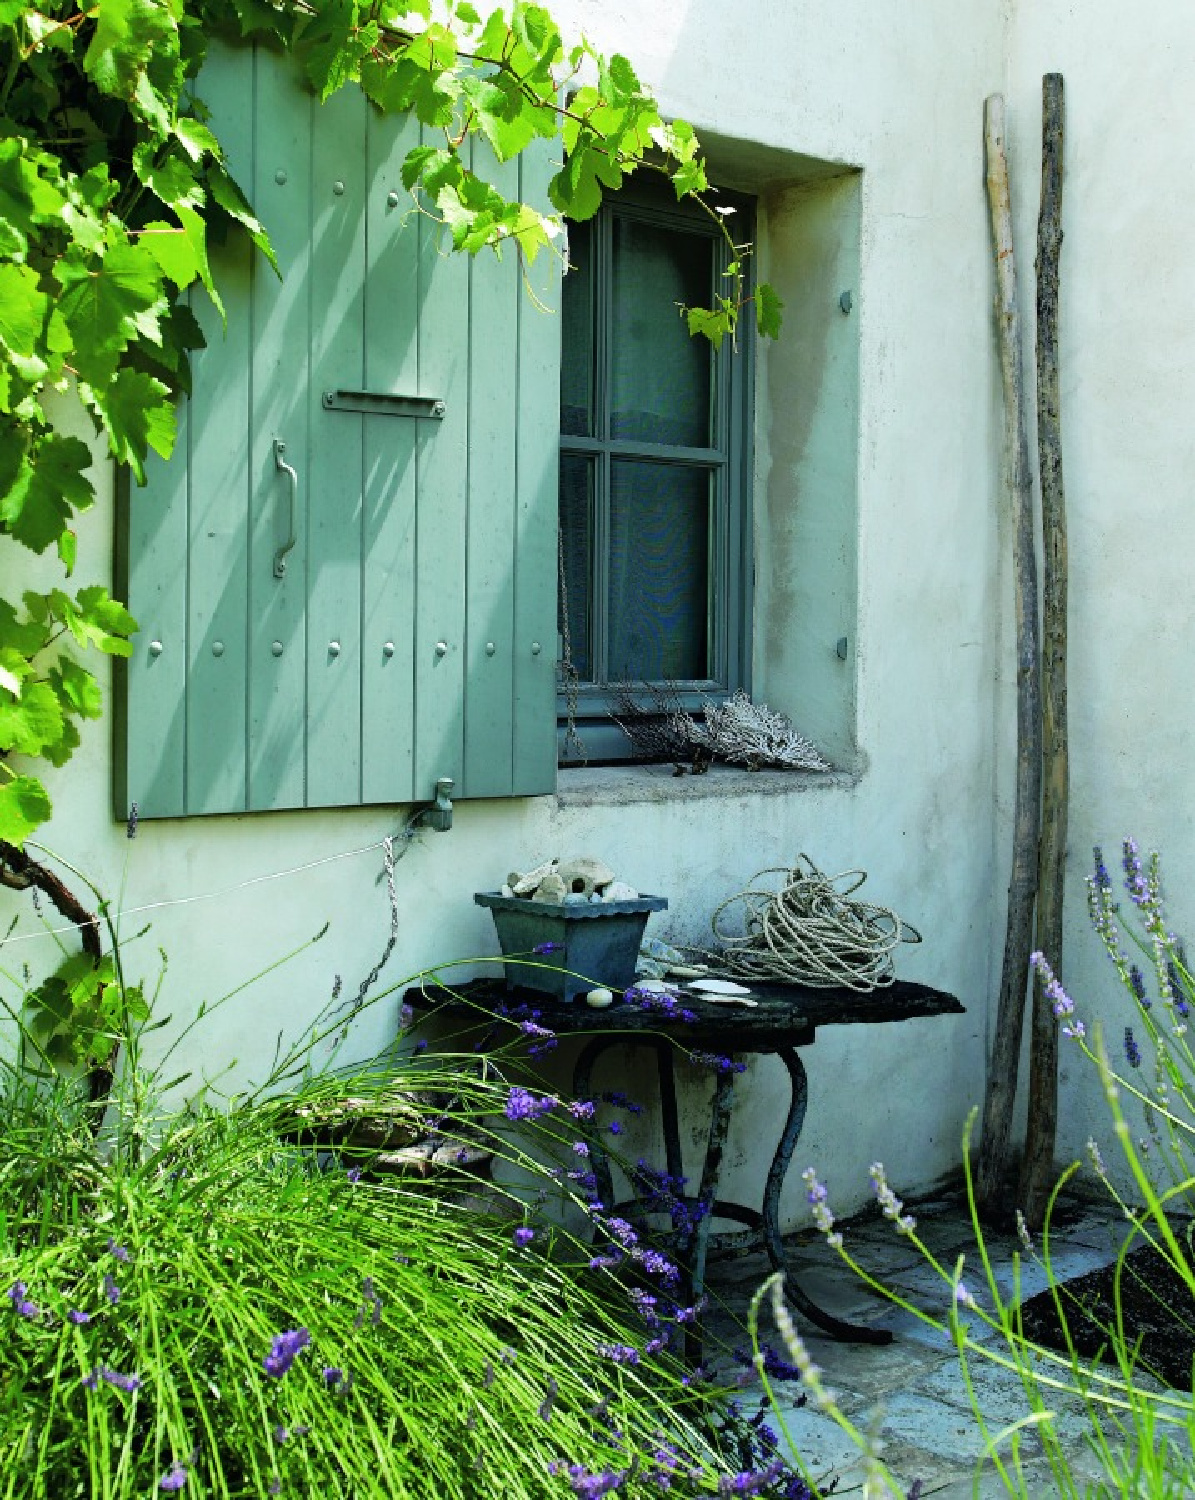 French farmhouse exterior with green shutters, climbing vines, and rustic textures - from LA VIE EST BELLE by Henrietta Heald. #frenchcountryliving #frenchfarmhouseexterior